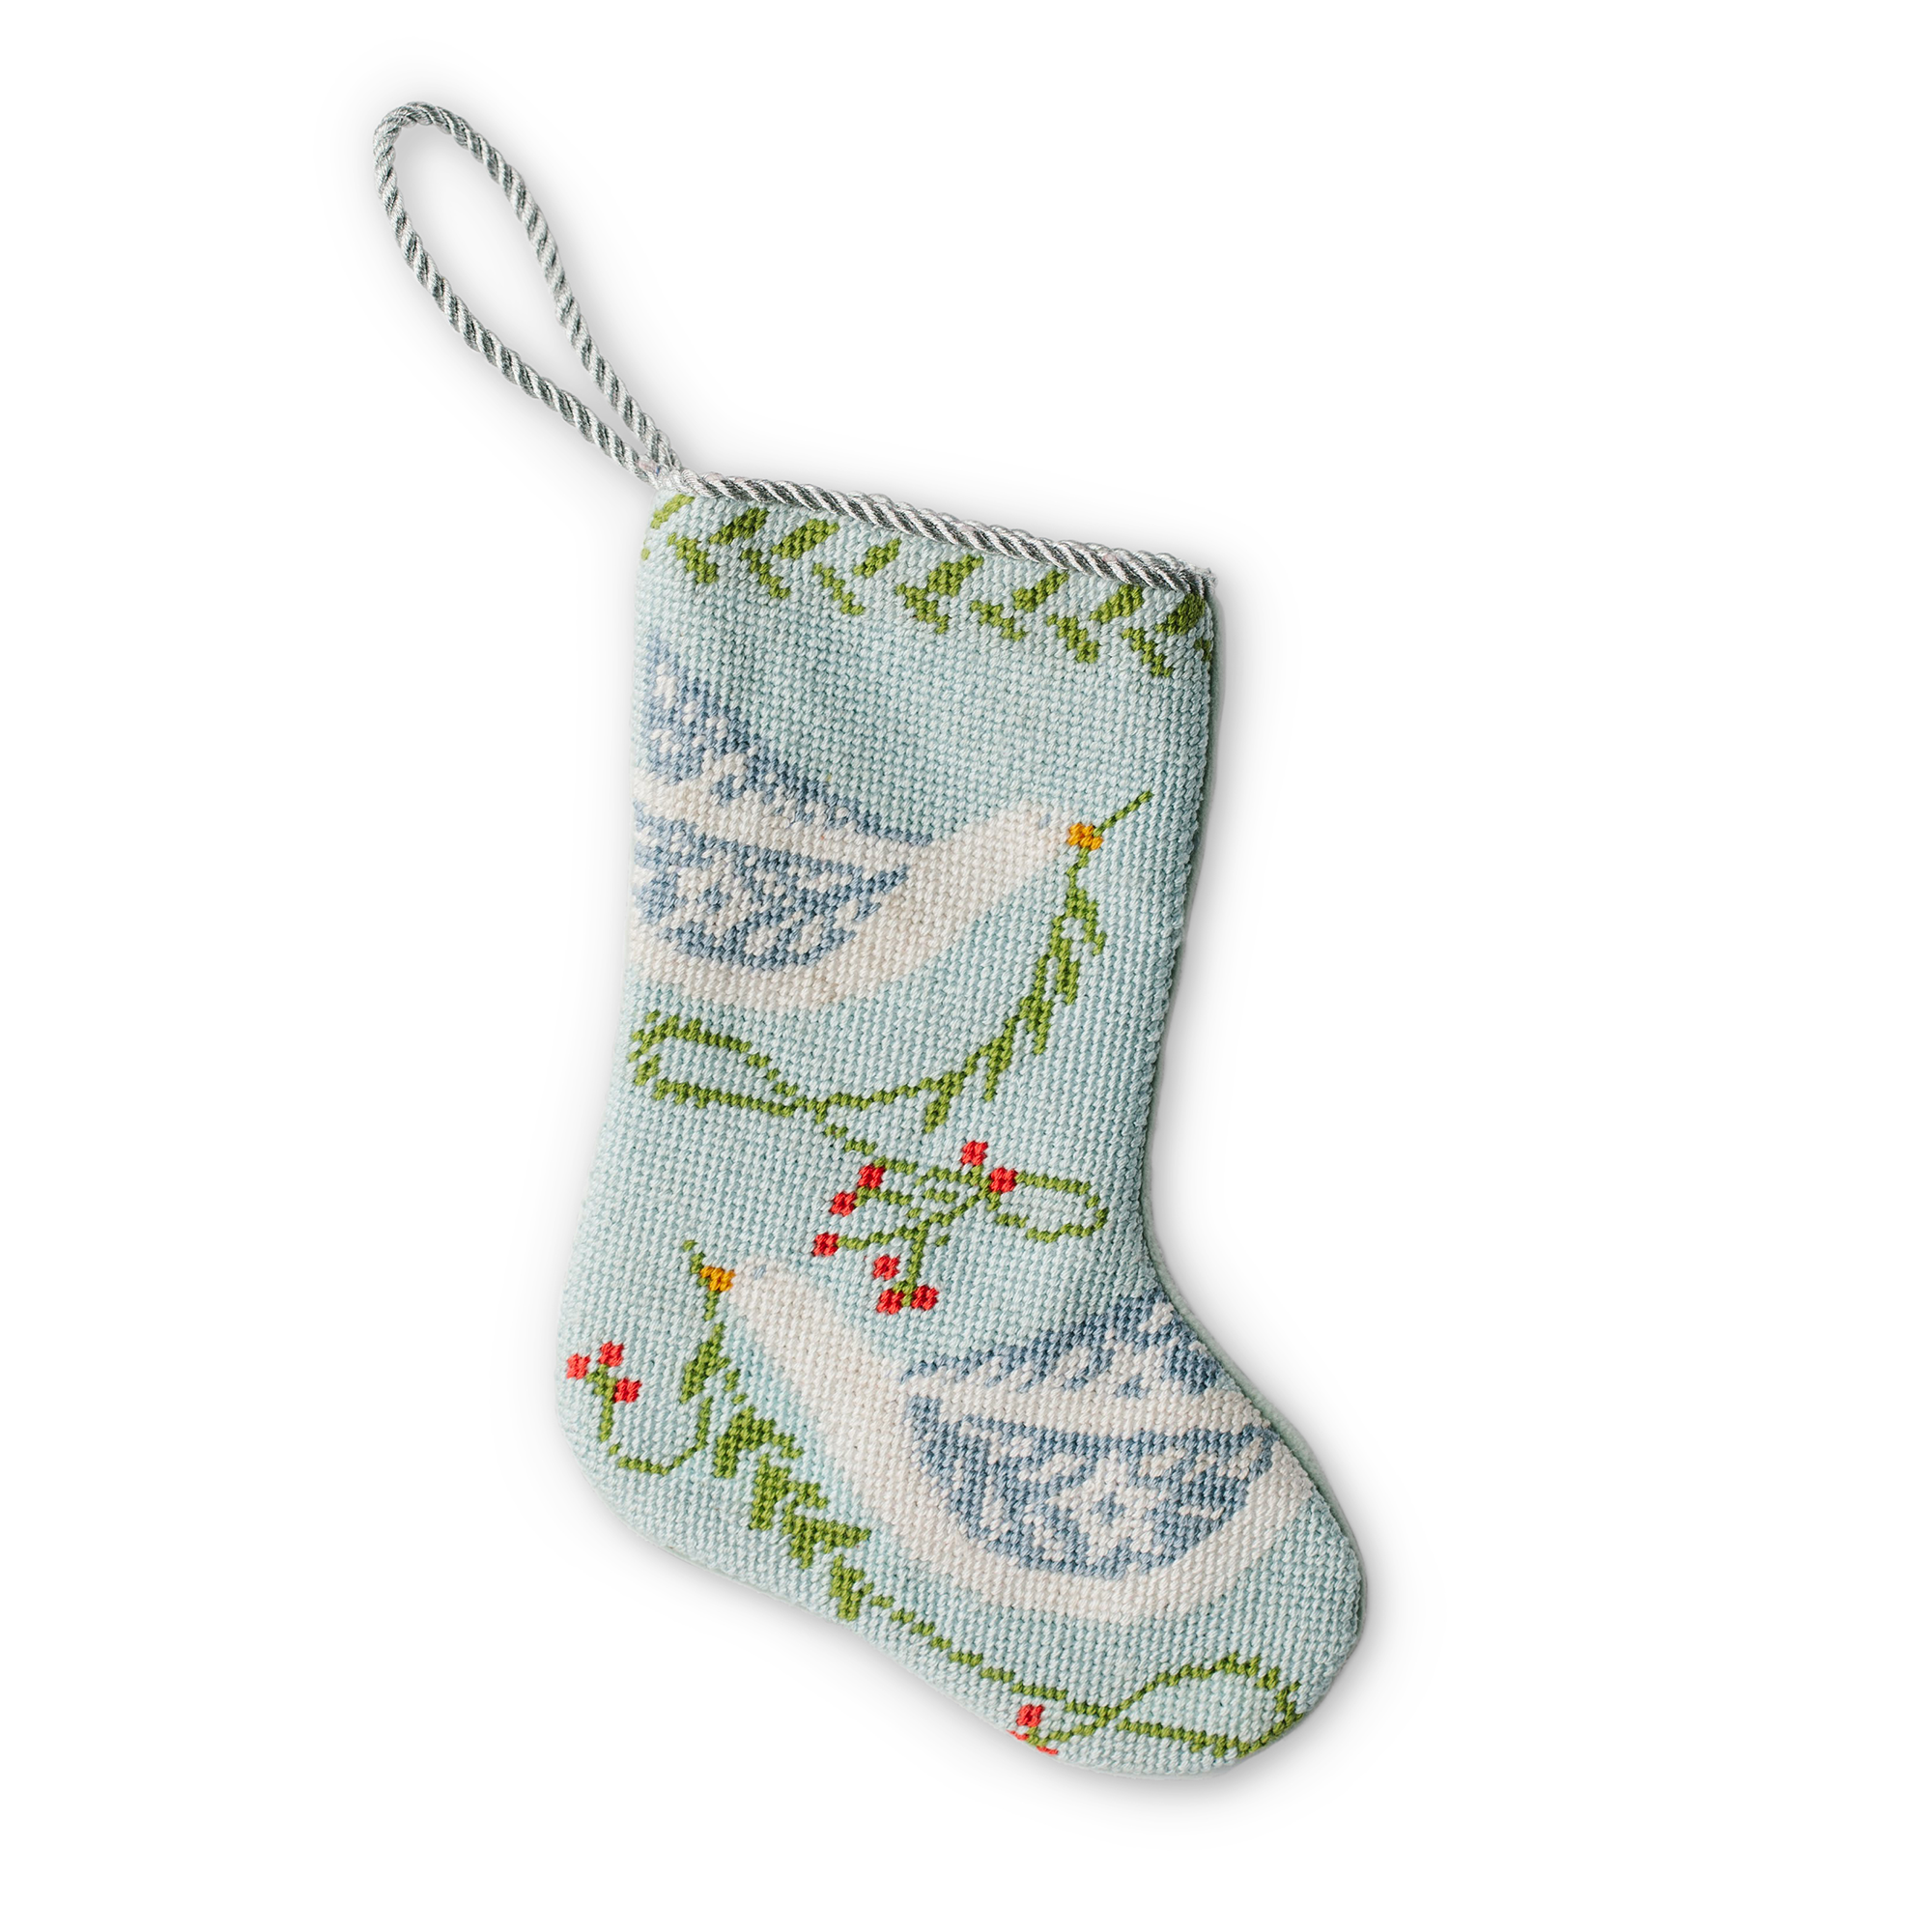 A small, intricately designed needlepoint stocking featuring an illustration of 2 doves carrying branches, set against a light blue background. A gold loop at the top makes it perfect as a tree ornament, place setting, or for hanging by the fireplace.